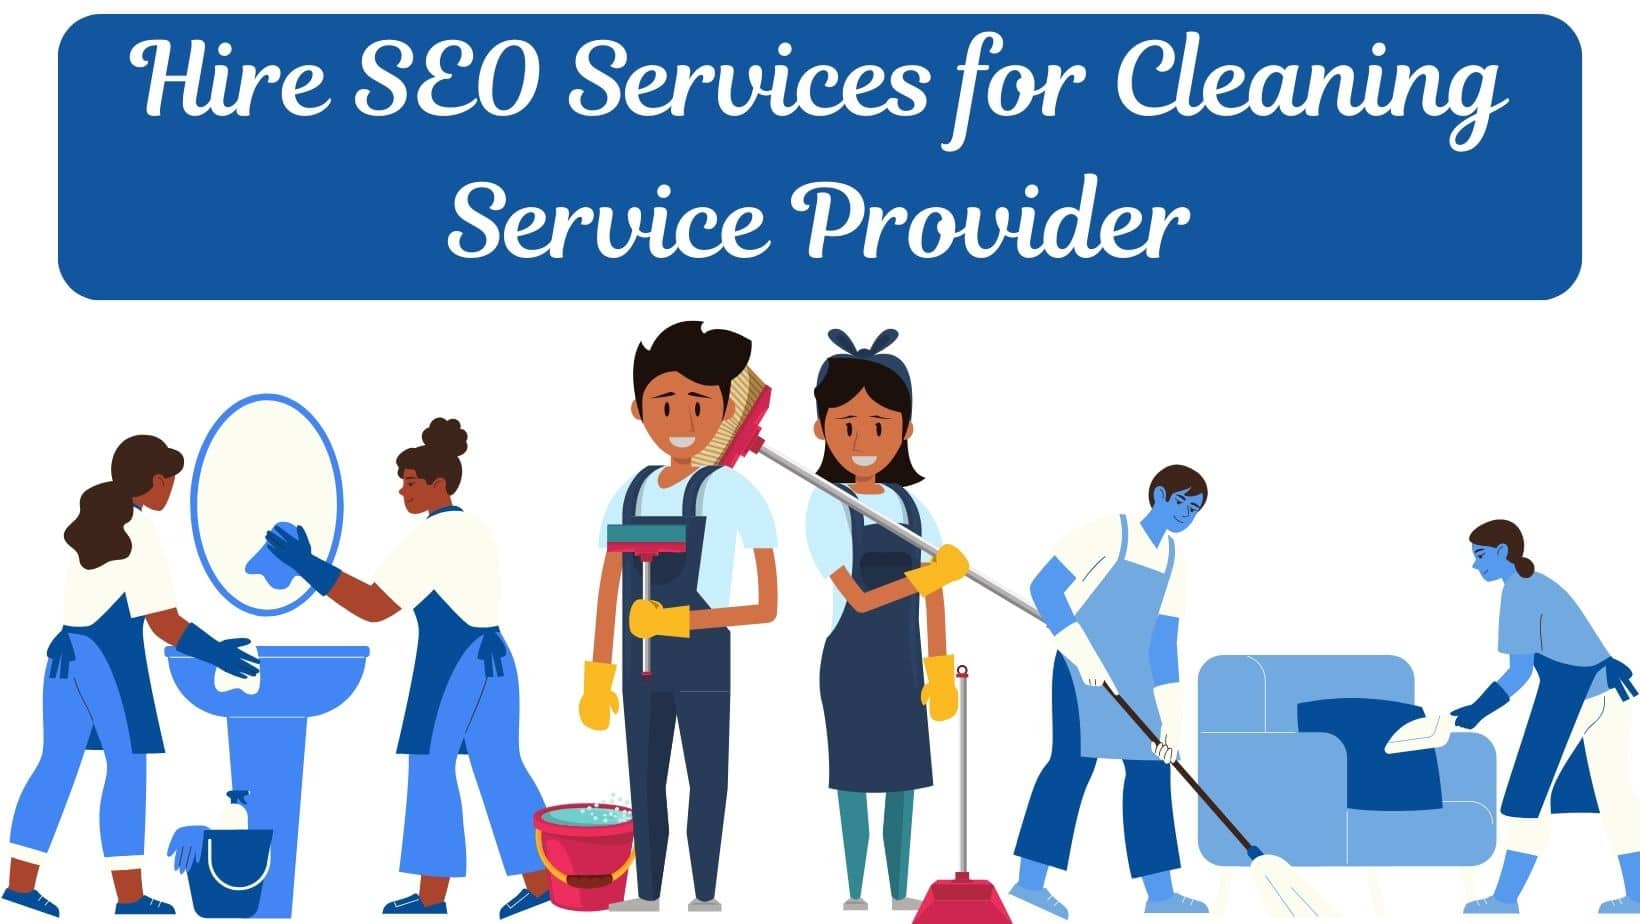 Hire SEO Services for Cleaning Service Provider